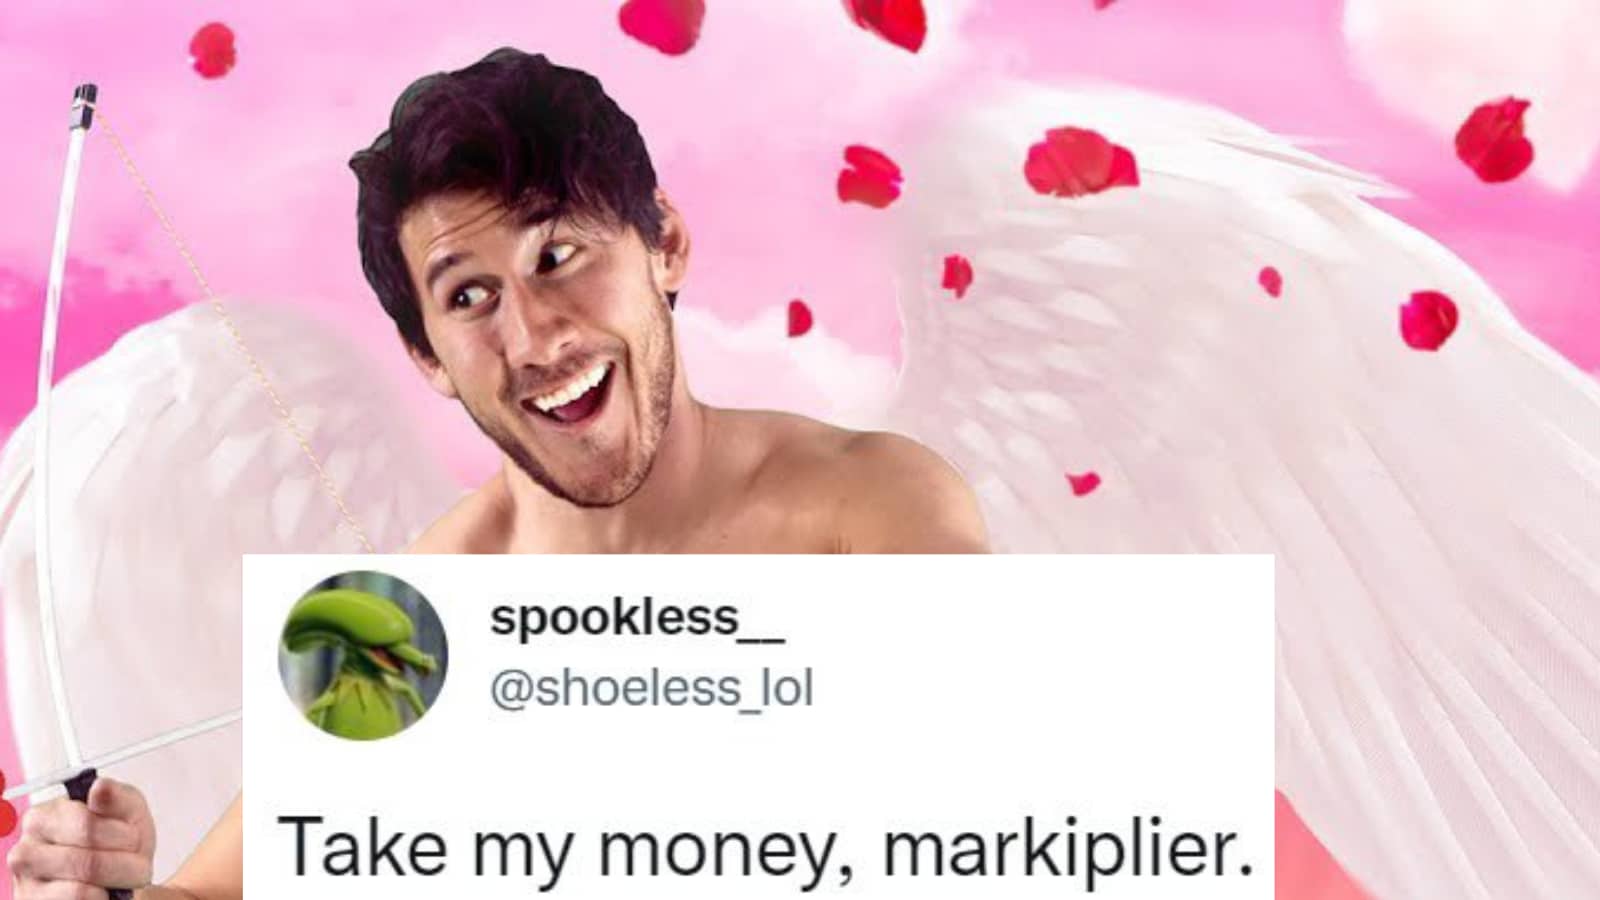 Why Did Markiplier Make Onlyfans